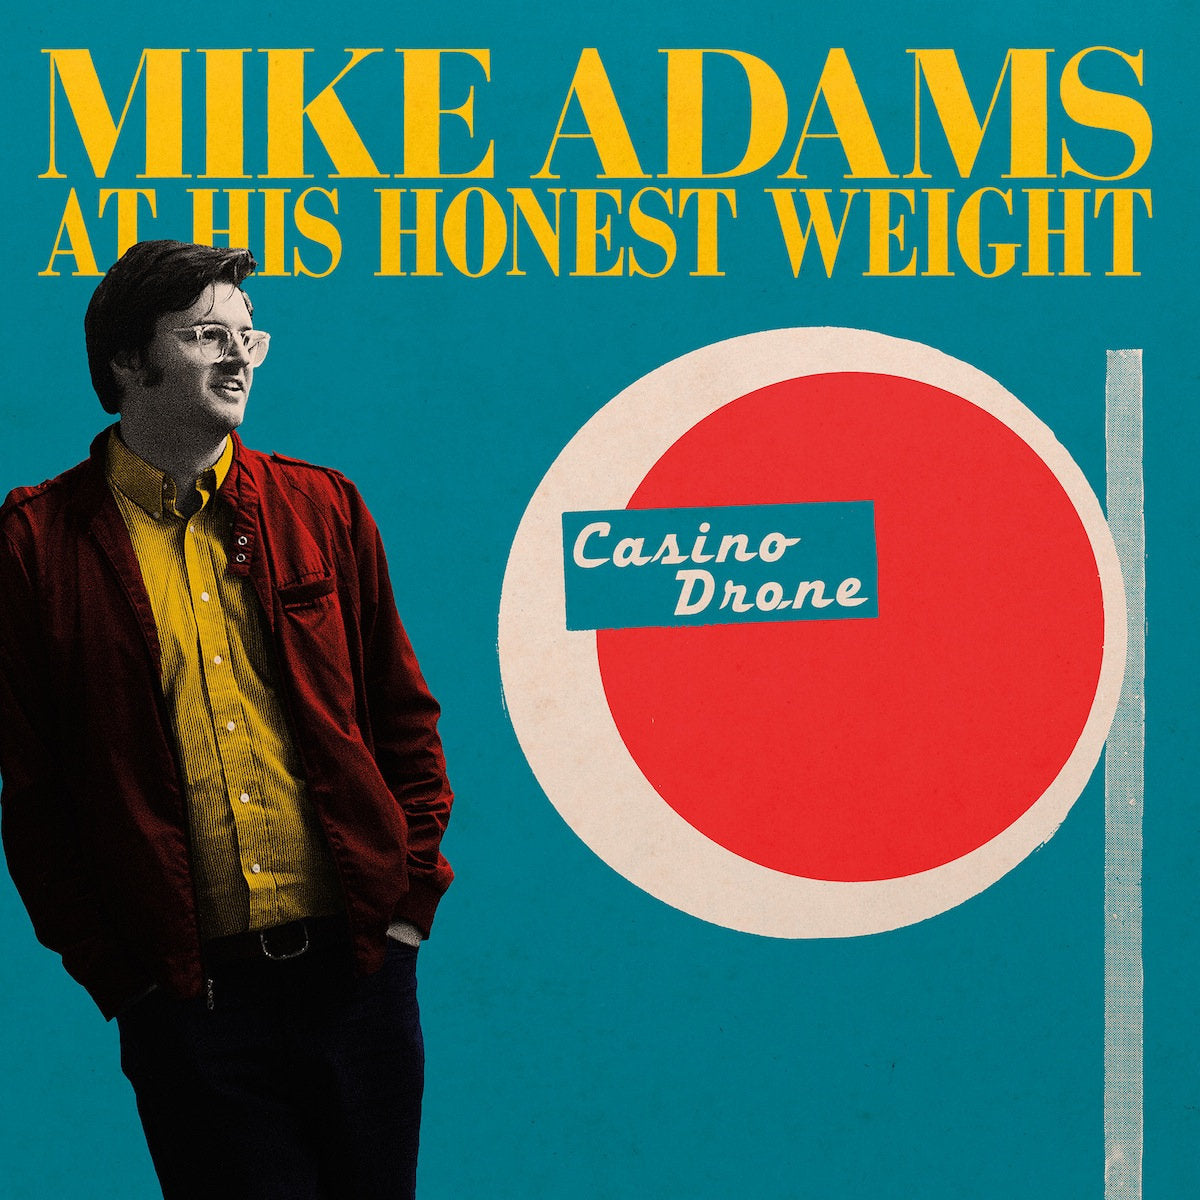 Mike Adams at his Honest Weight - Casino Drone